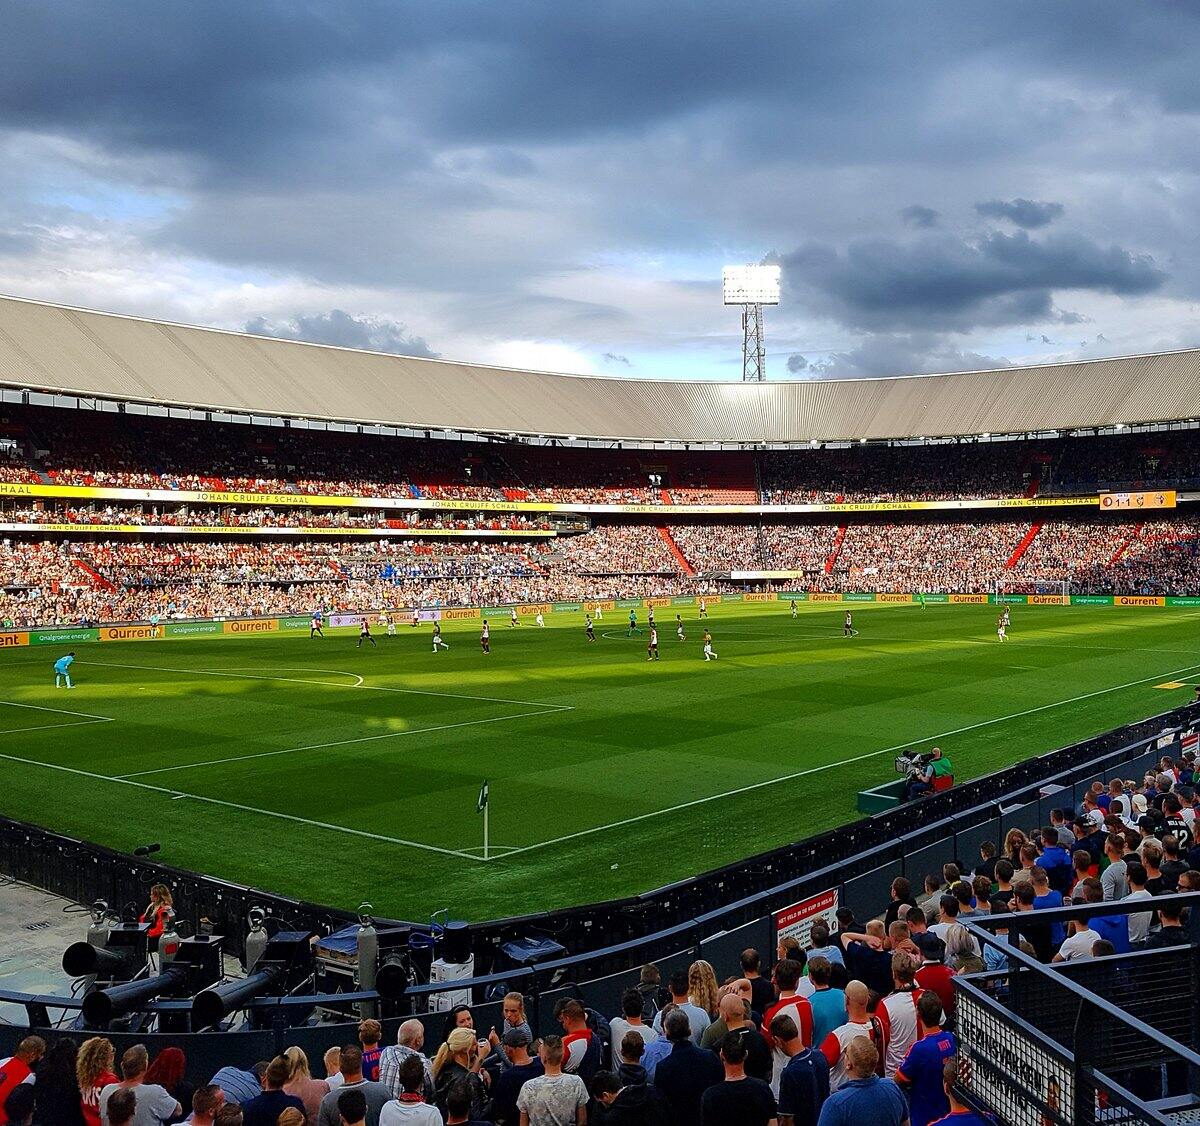 20-mind-blowing-facts-about-de-kuip-stadion-feijenoord